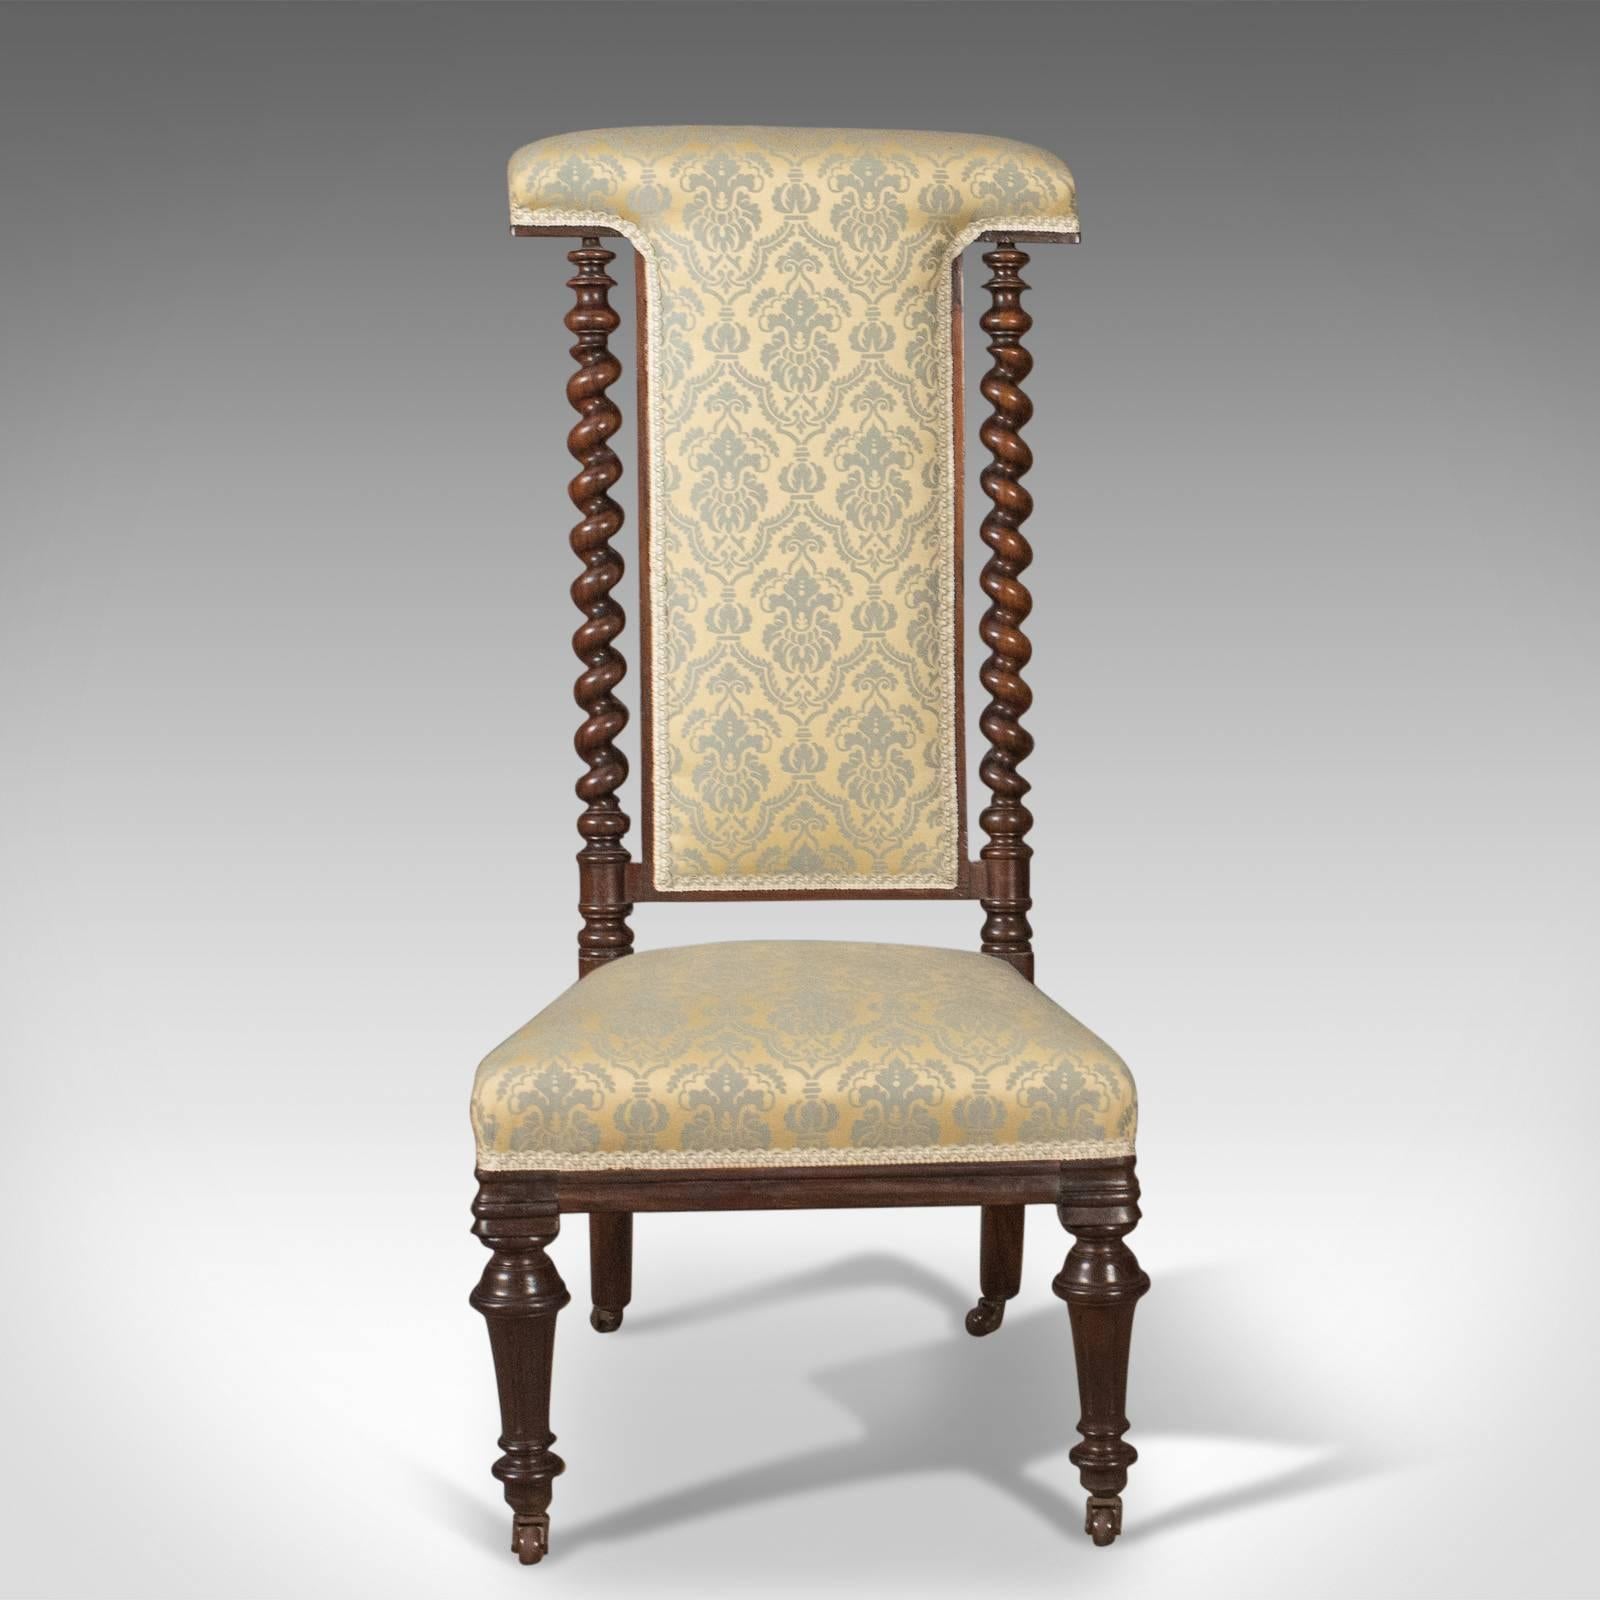 This is a Victorian, antique chair, a 19th century prie dieu in rosewood ideal as a bedroom side chair and dating to circa 1870.

Crafted in rosewood with the most glorious grain detail in the lustrous polished finish
Raised upon fluted, turned